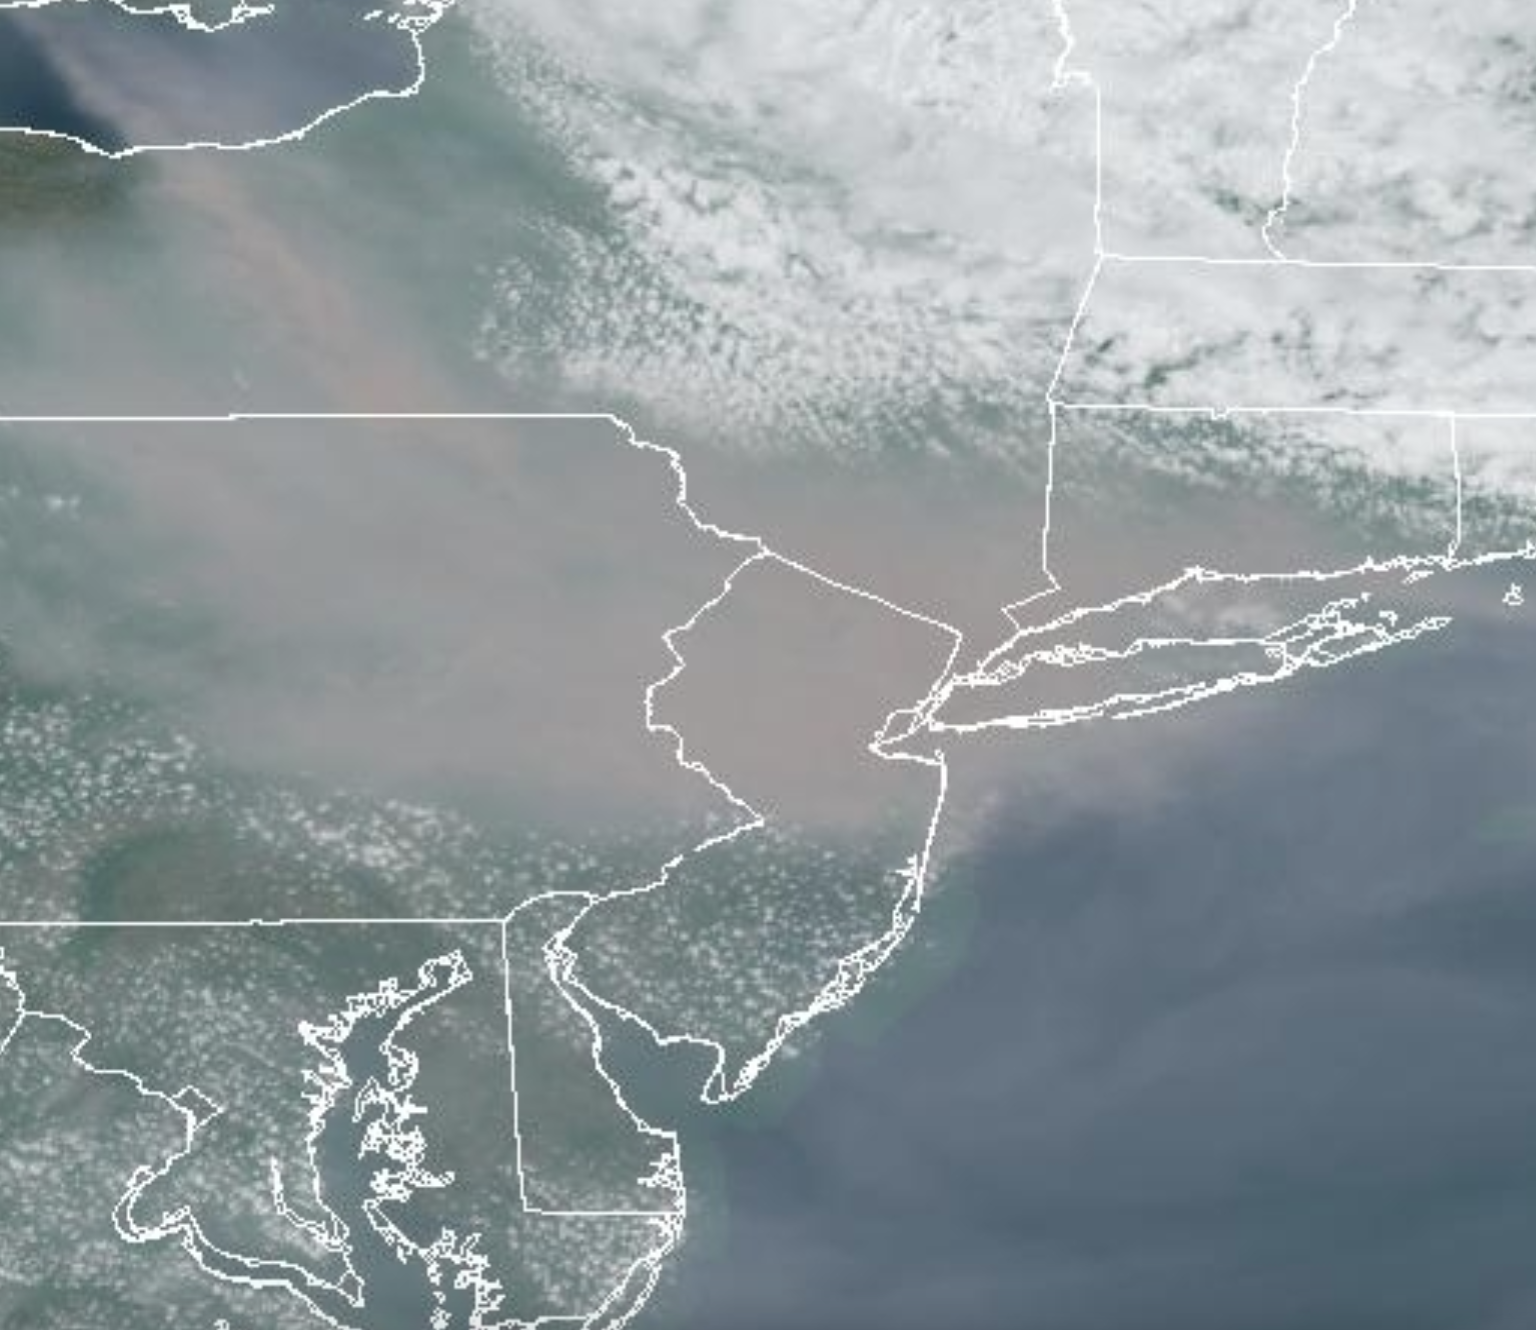 Smoky skies over northern New Jersey and surroundings at 2:02 PM on June 7th, as seen by NOAA GOES visible satellite.